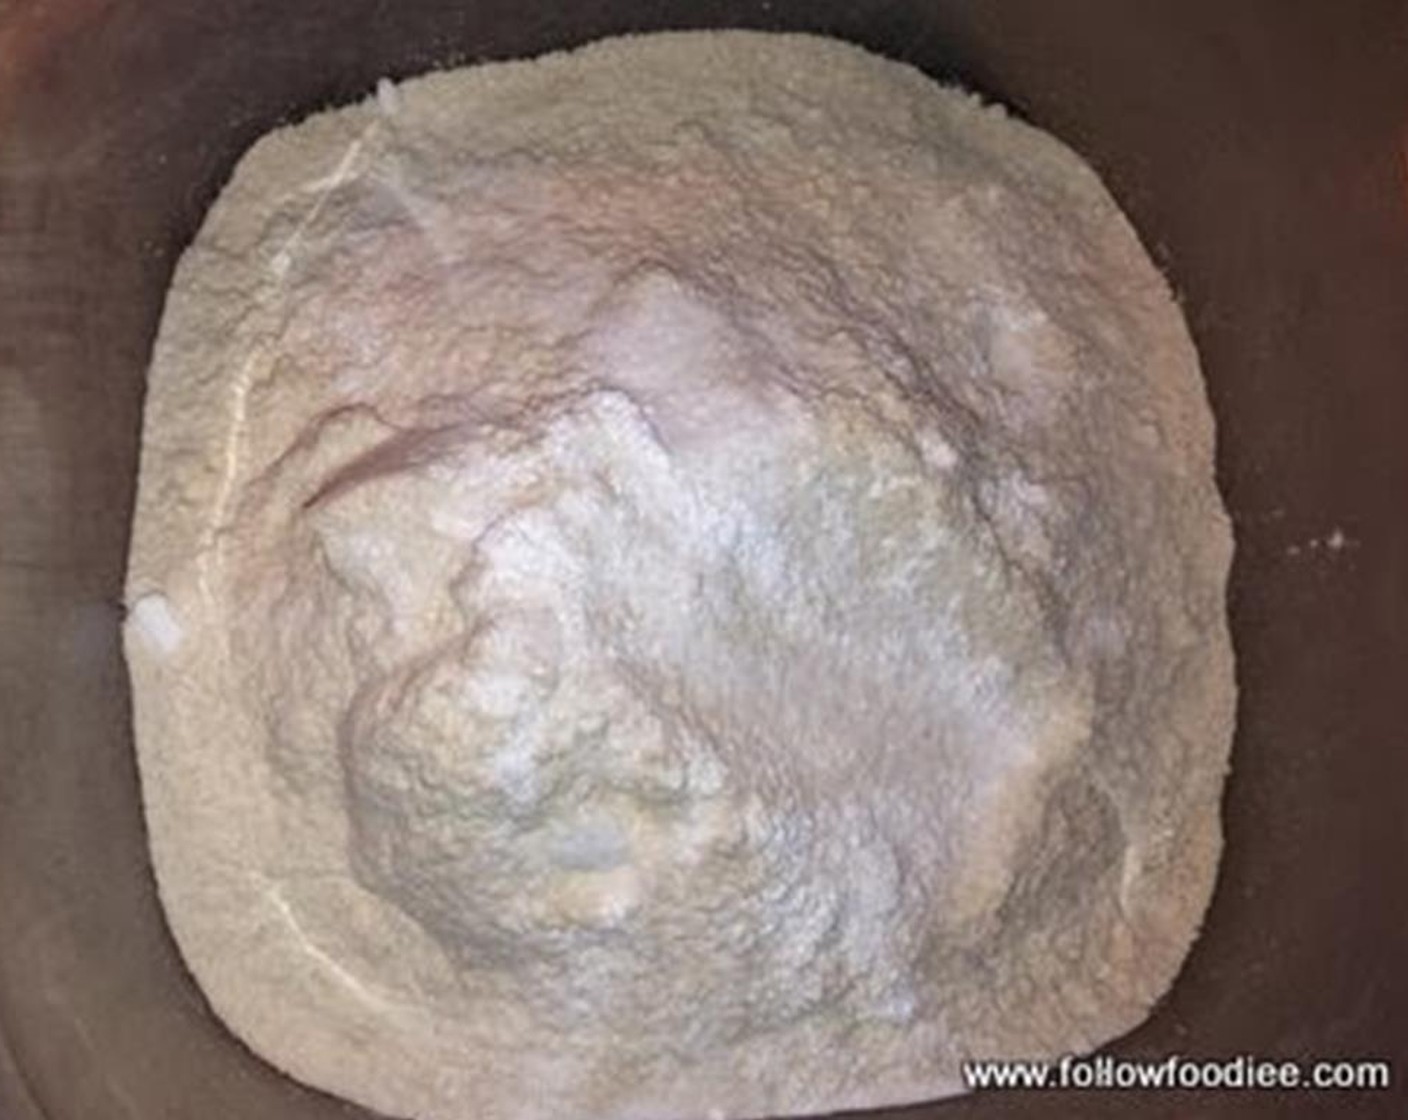 step 1 In a mixing pan, add the All-Purpose Flour (3 cups), Baking Powder (3/4 tsp), Baking Soda (1/4 tsp) and Salt (to taste).  Mix well.